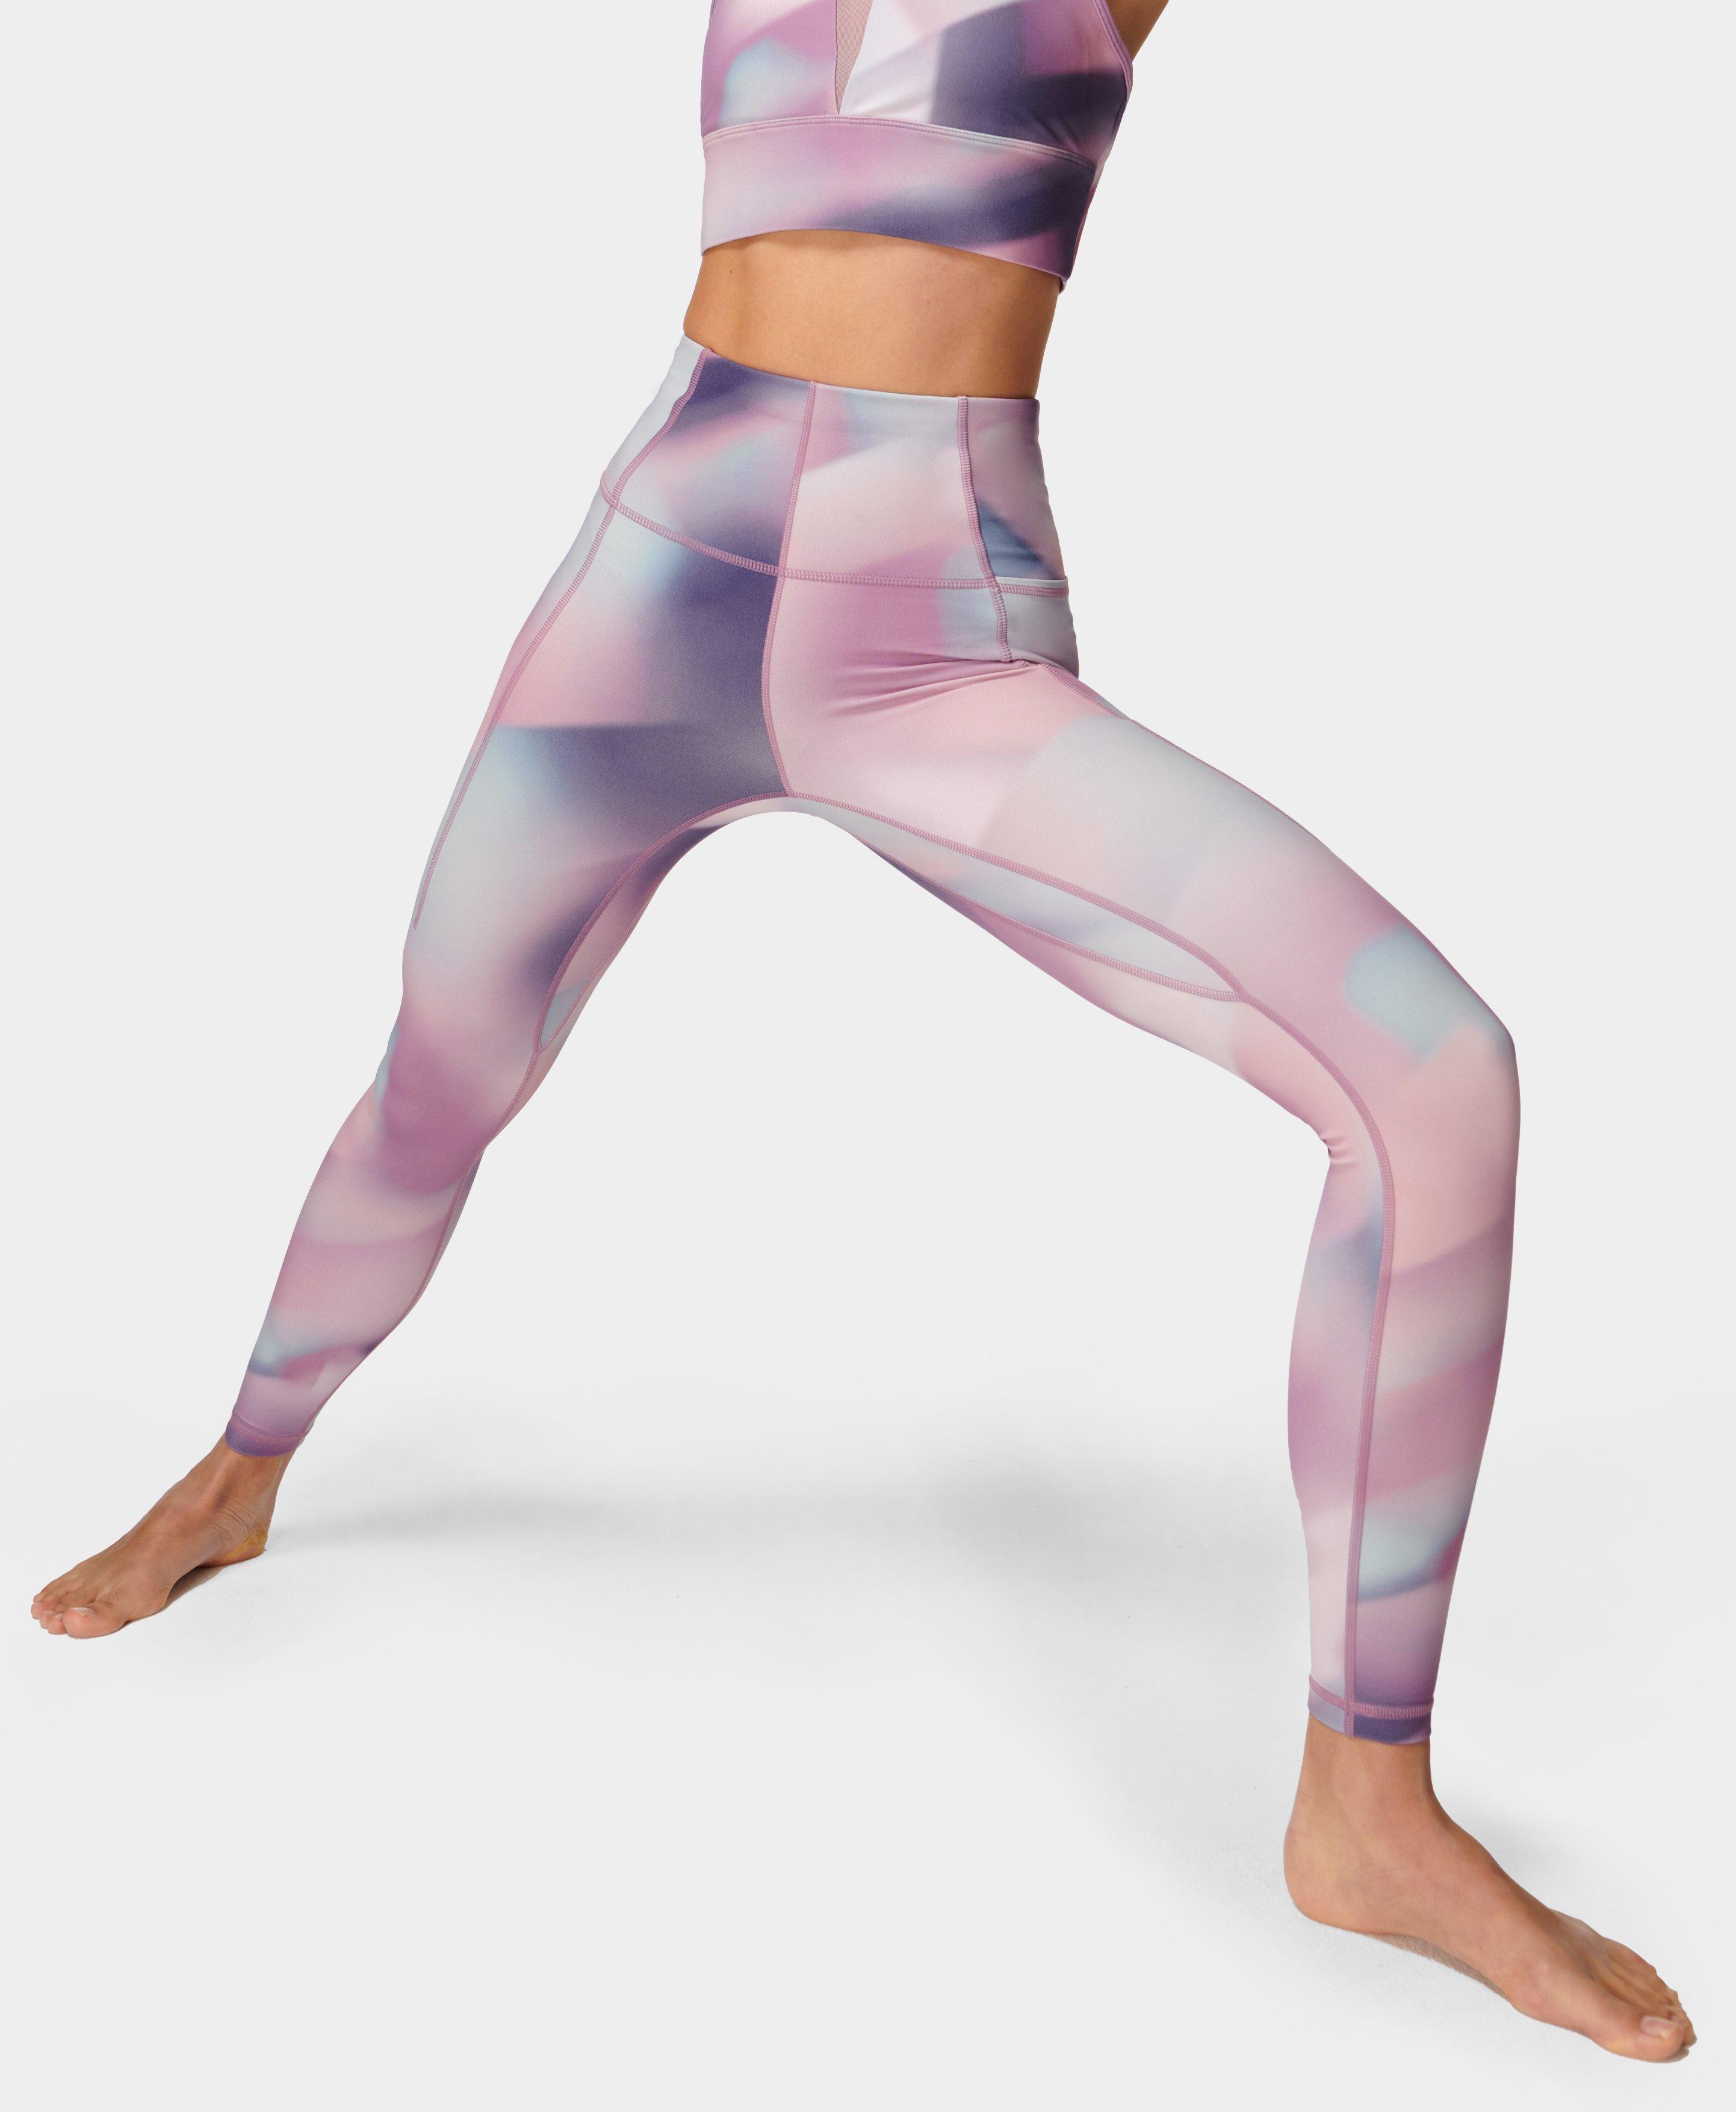 Ultra Soft SWEET CANDY LEGGINGS / Sexy Funky Yoga Pants Bottoms